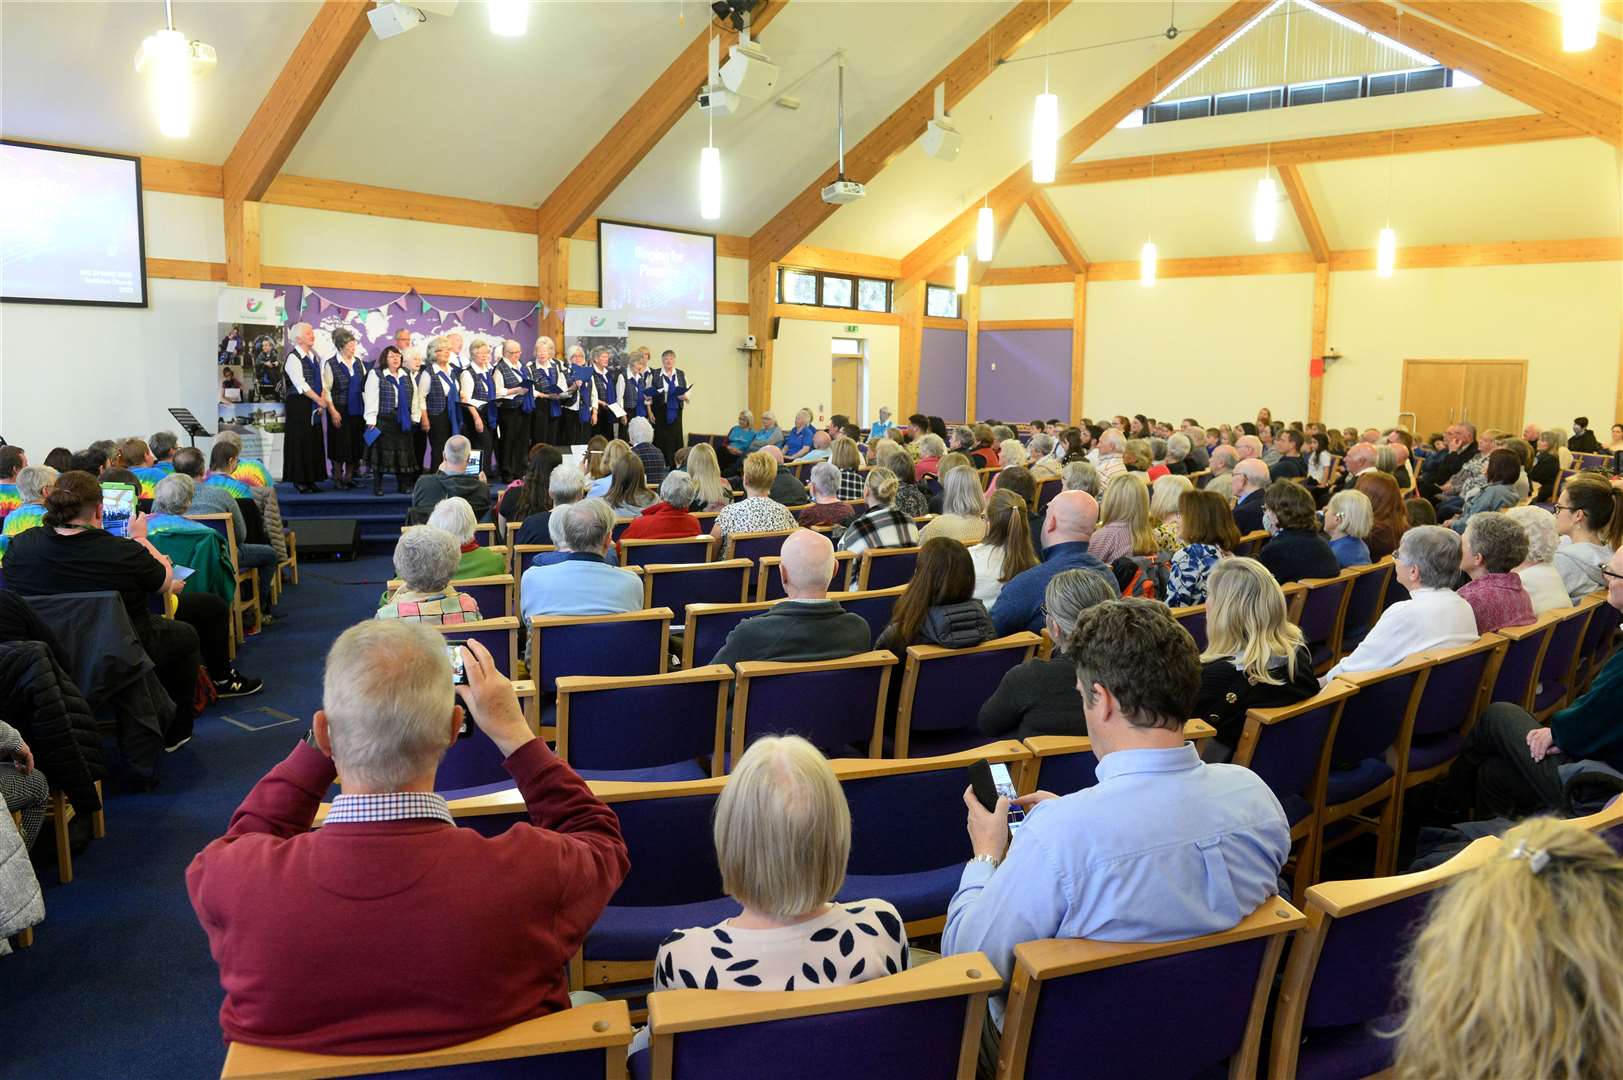 Audience members were treated to an entertaining evening at the Big Spring Sing concert at Smithton Church.